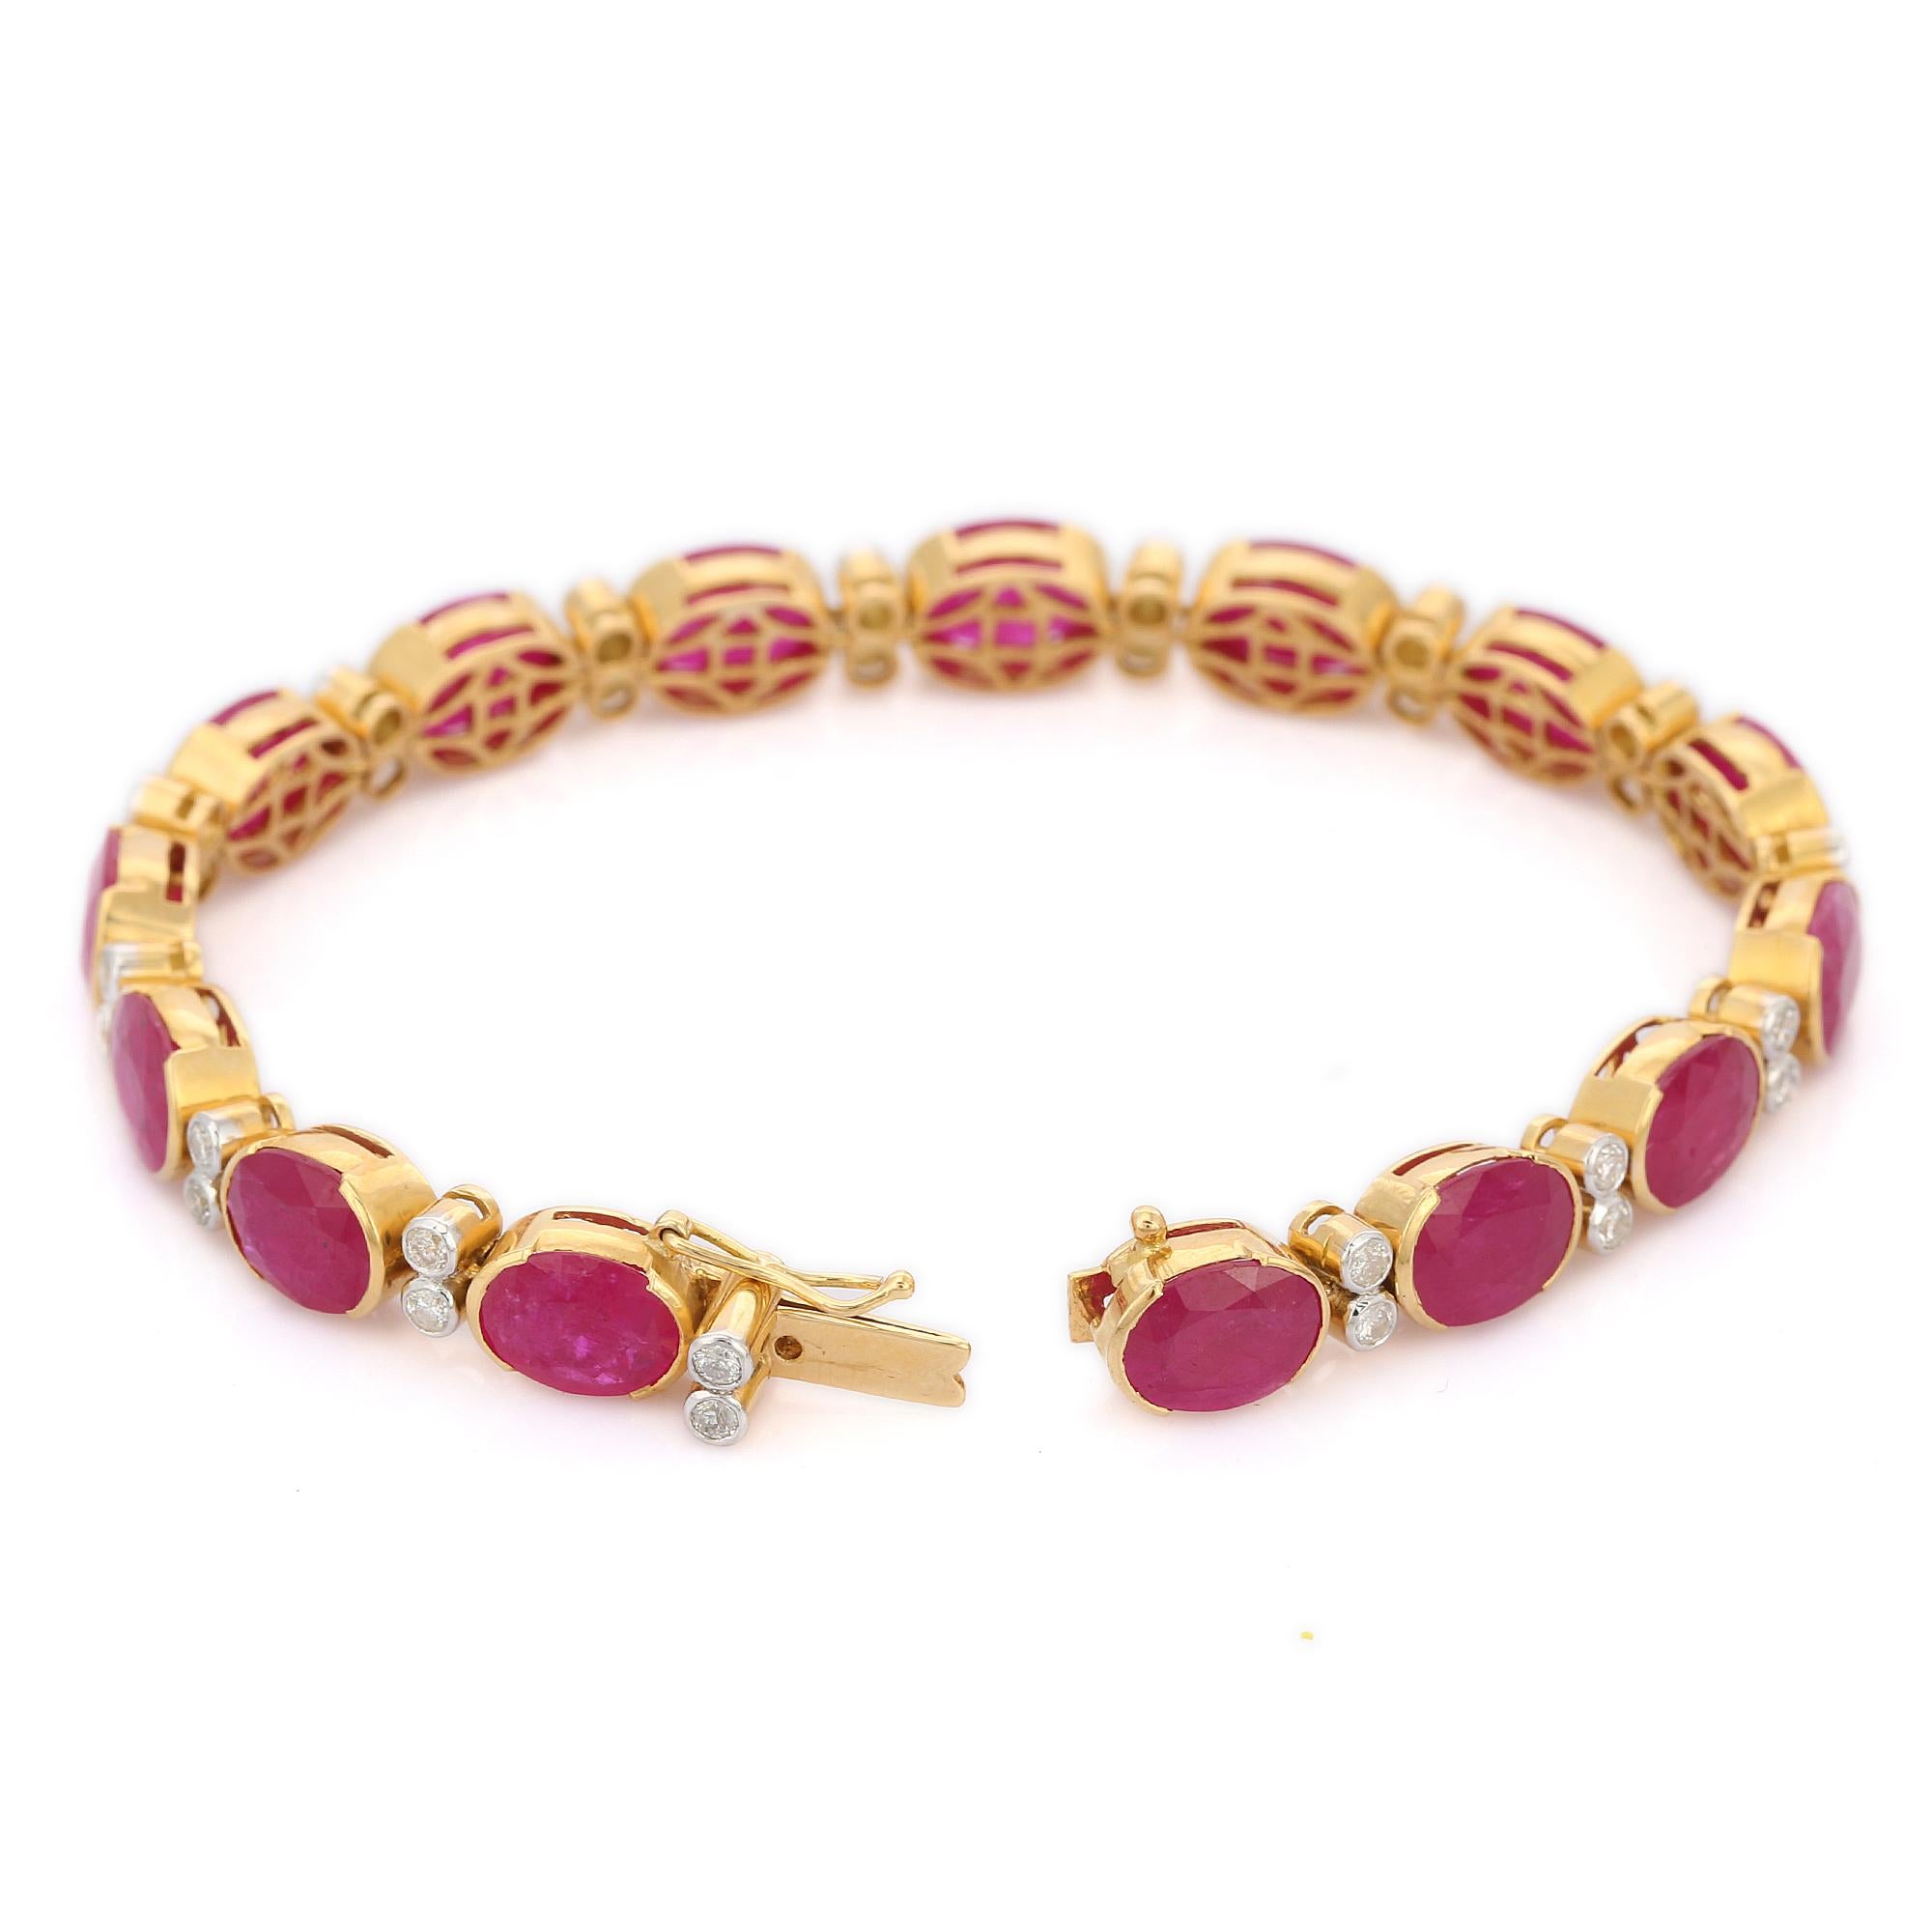 Artist 29.6 Cts Oval Cut Ruby and Diamond Bracelet in 18K Yellow Gold  For Sale